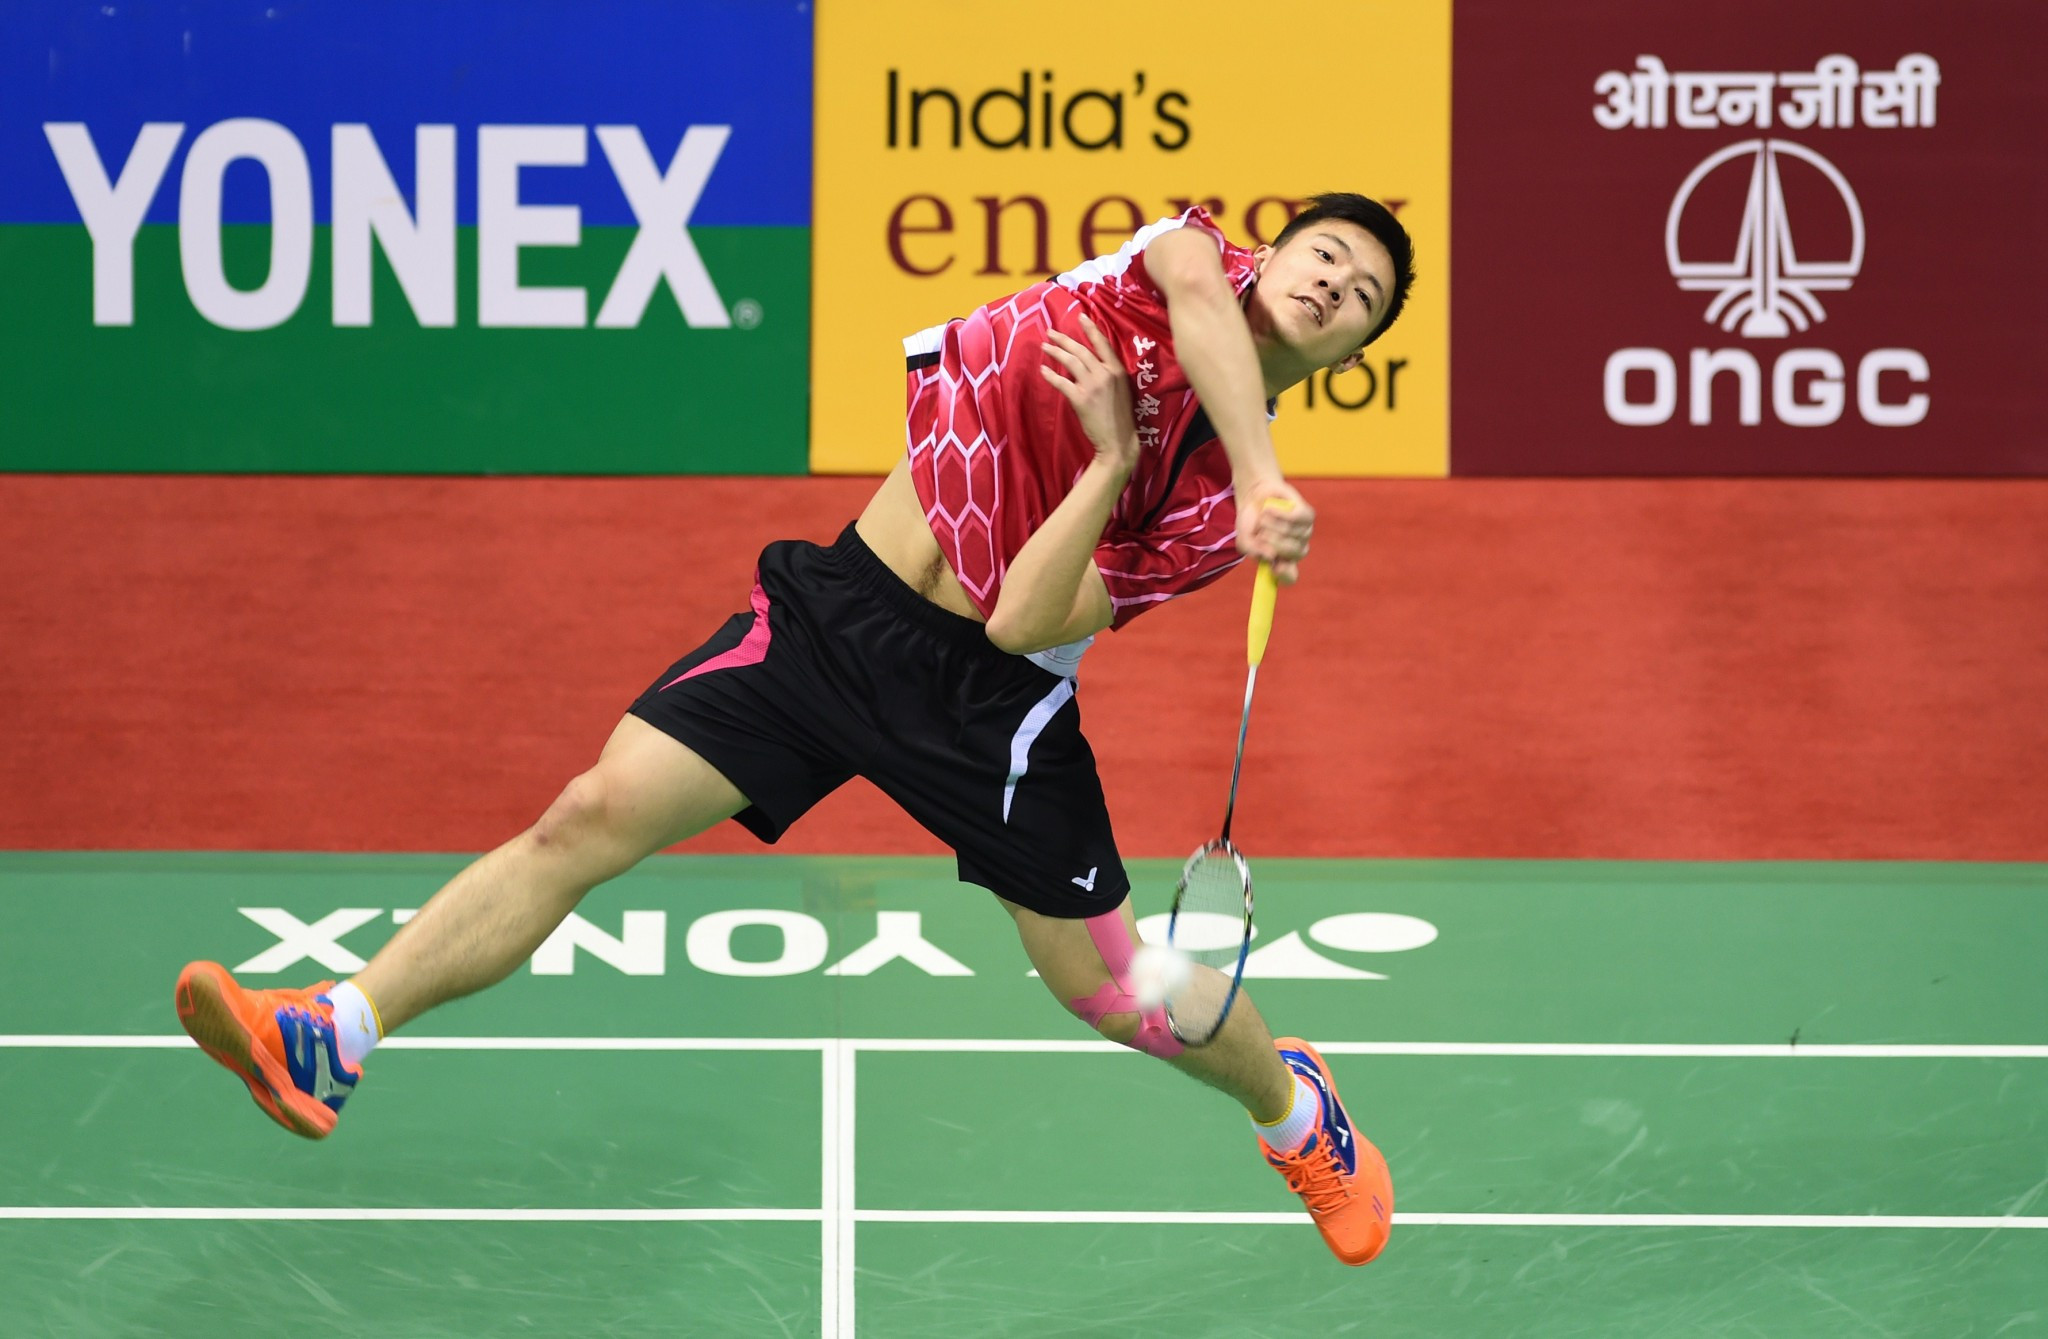 Top seed Tzu Wei Wang of Chinese Taipei is safely through to the second round of the men's singles draw ©Getty Images